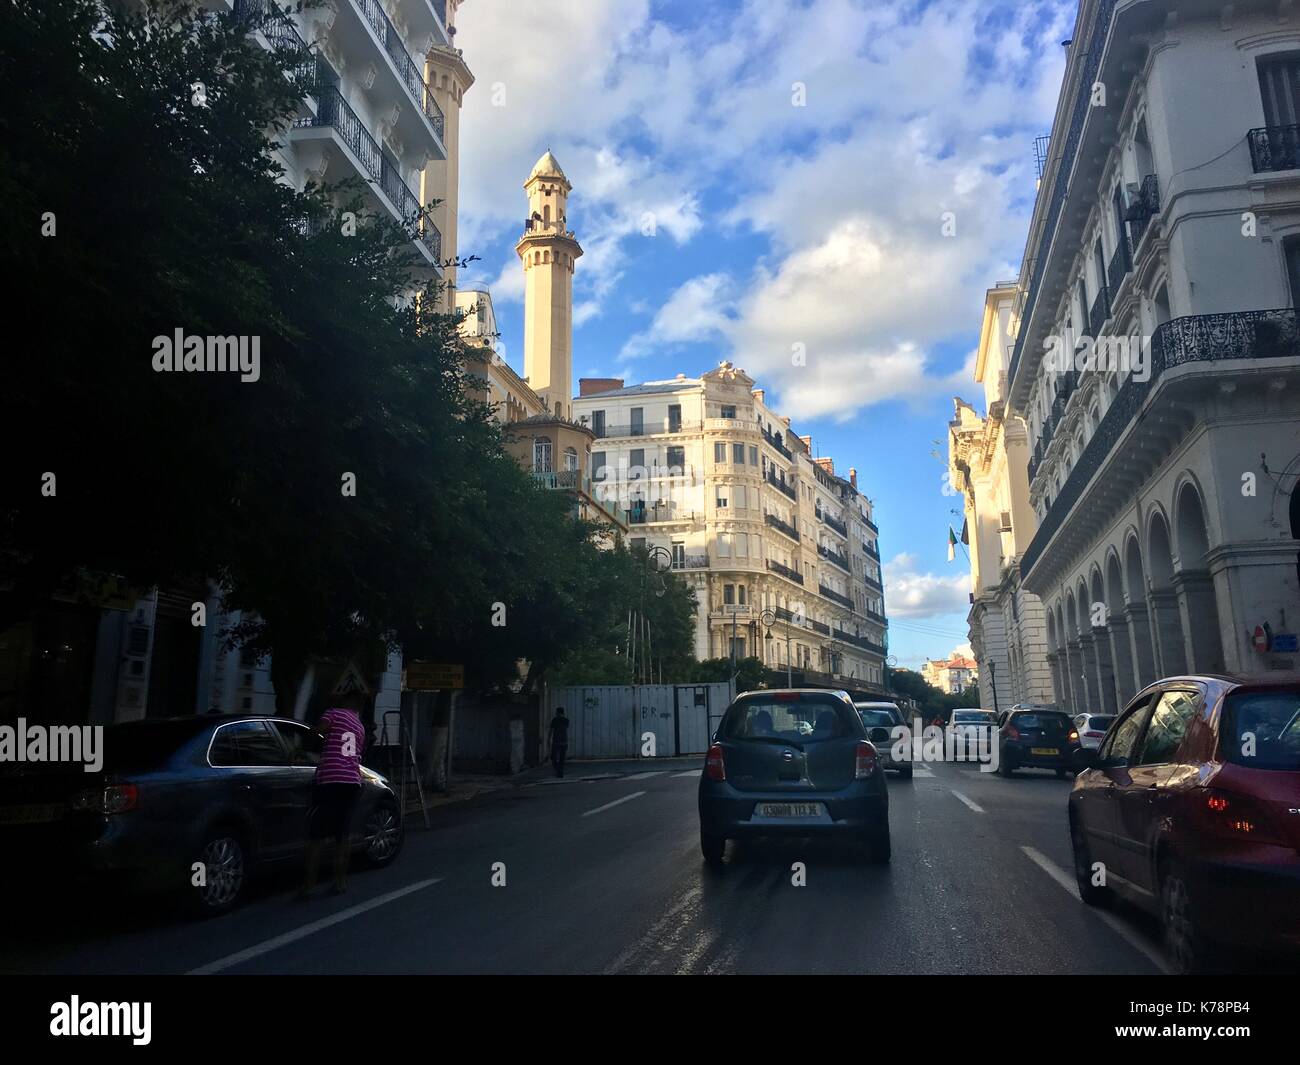 ALGIERS, ALGERIA - SEP 12, 2017: French colonial side of the city of Algiers Algeria.Modern city has many old French type buildings. Stock Photo